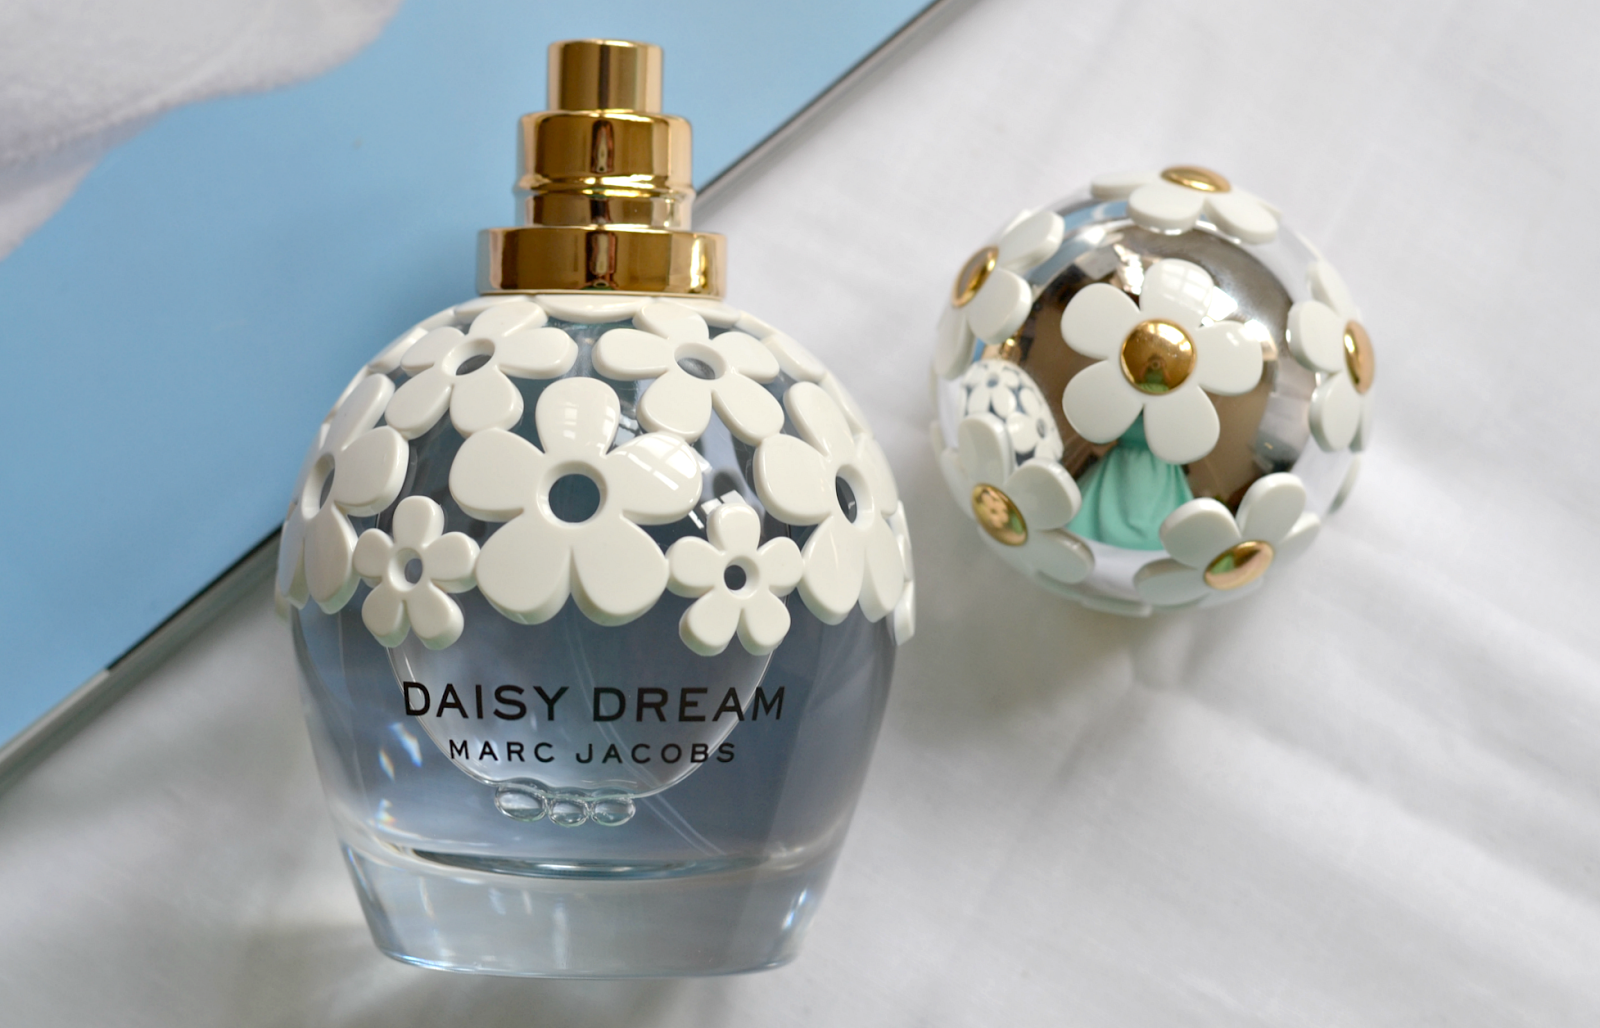 NEW From Marc Jacobs: 'Daisy Dream' (A Delight For The Senses) | Hayley ...